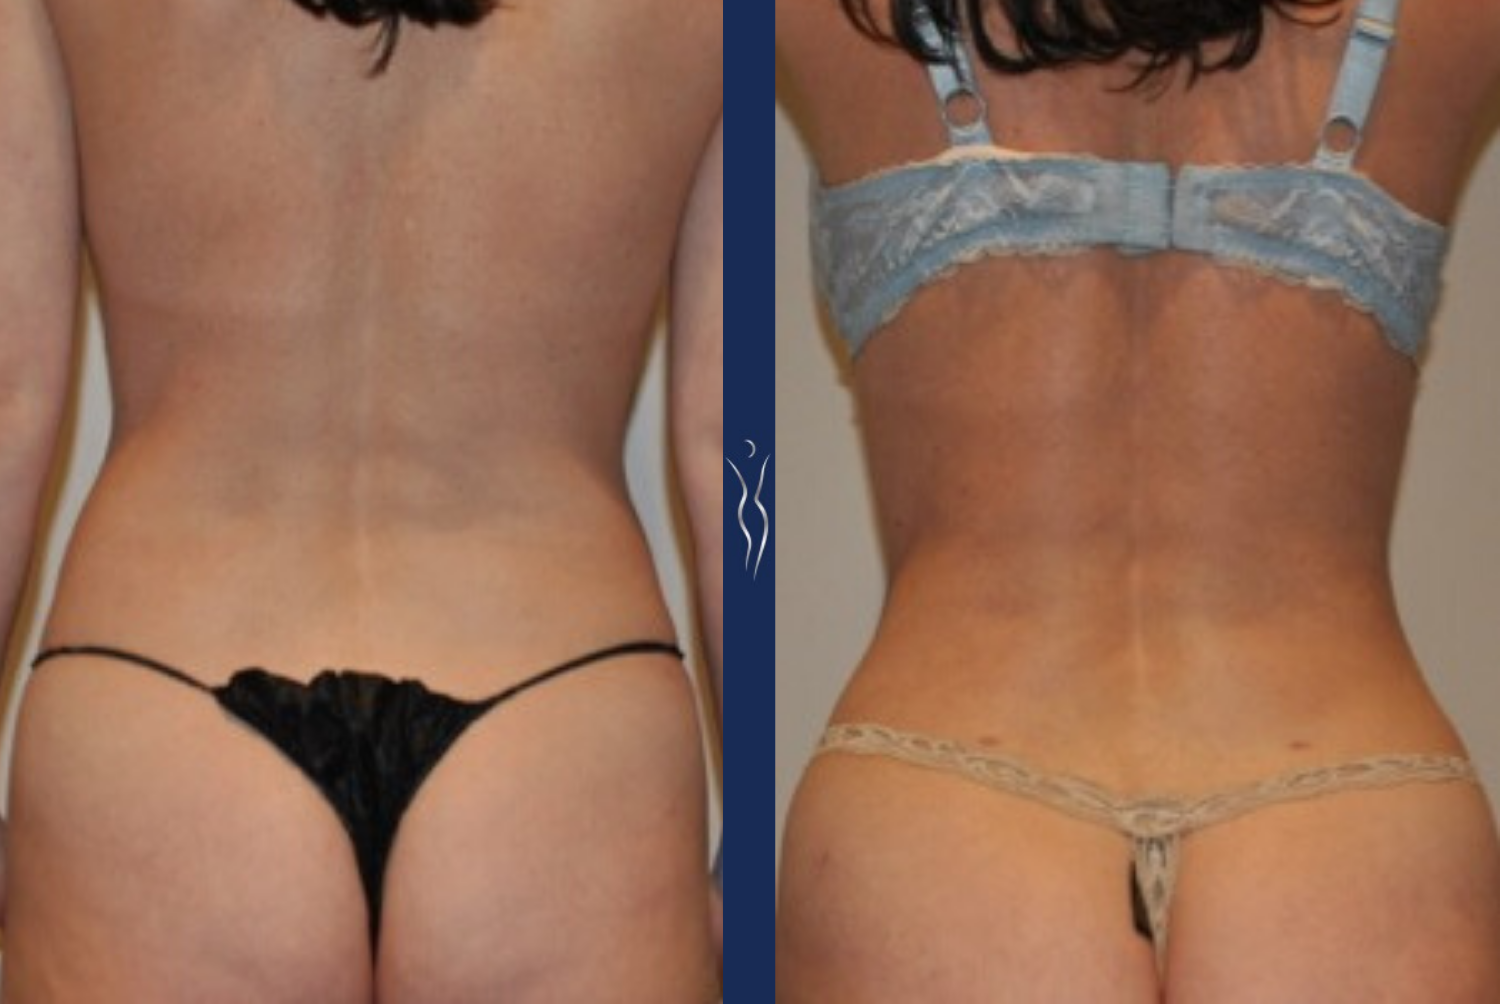 36 year old caucasian lady VASER liposuction and Renuvion back